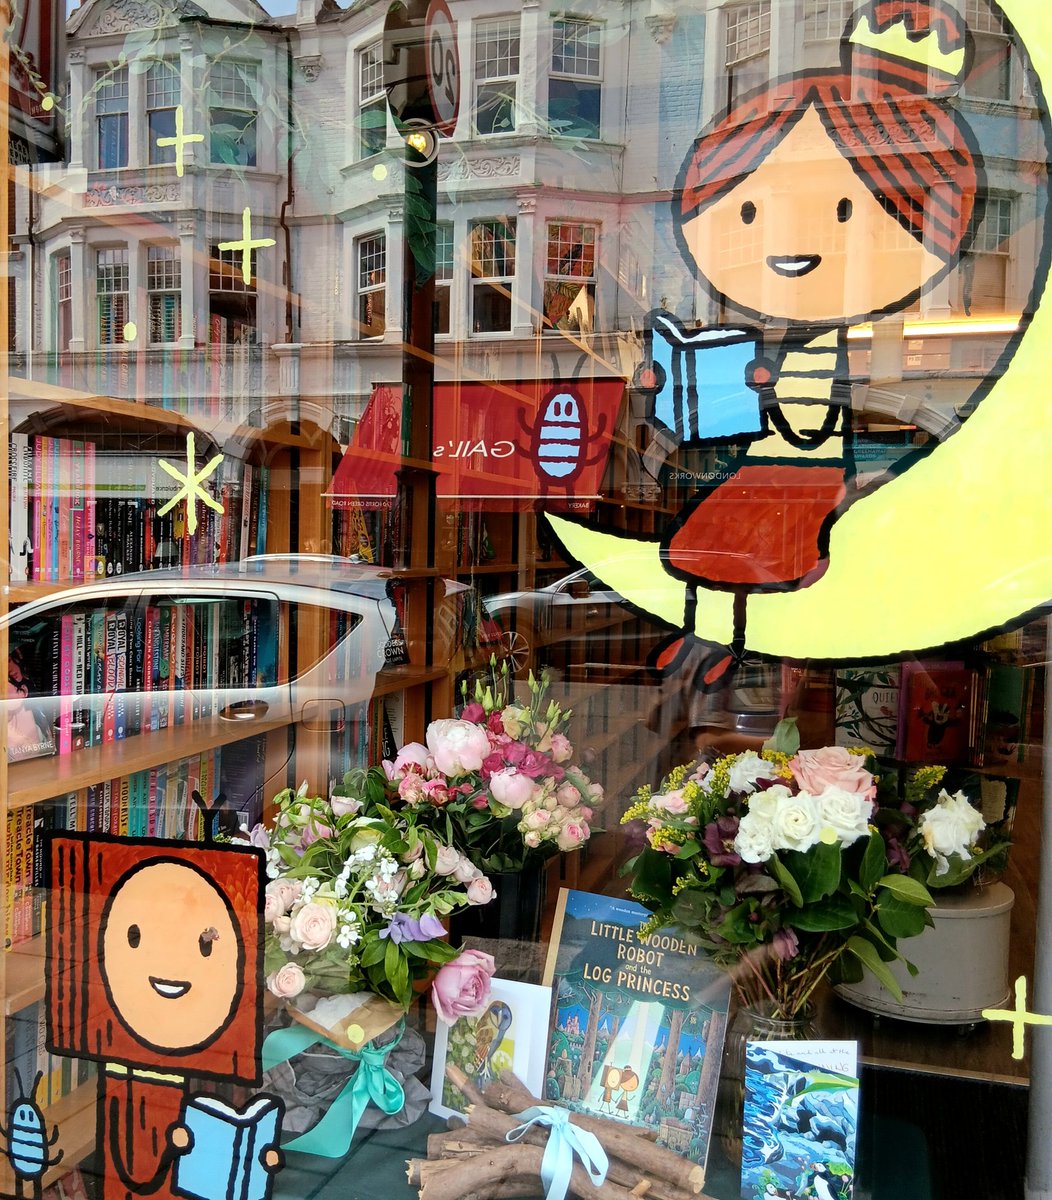 We keep getting the most beautiful flowers sent after our Best Bookshop #Nibbies win, @tomgauld your gorgeous forest window is blooming! Thank you to the @PuffinBooks and @KidsBloomsbury!